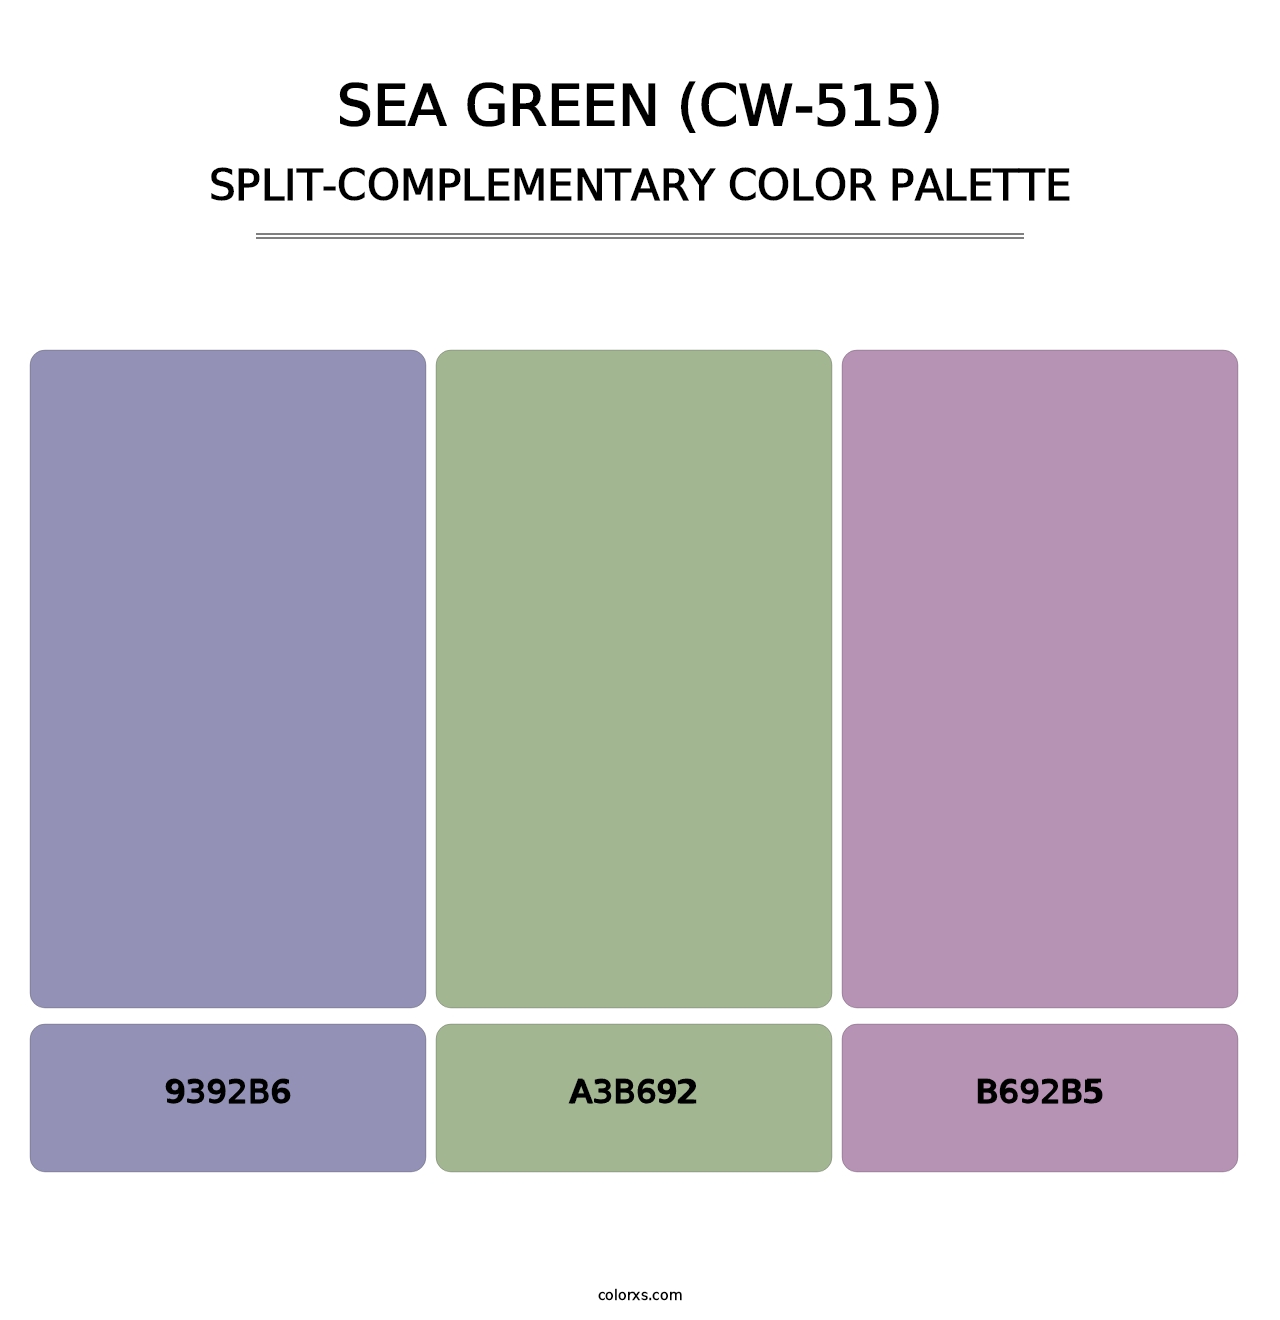 Sea Green (CW-515) - Split-Complementary Color Palette